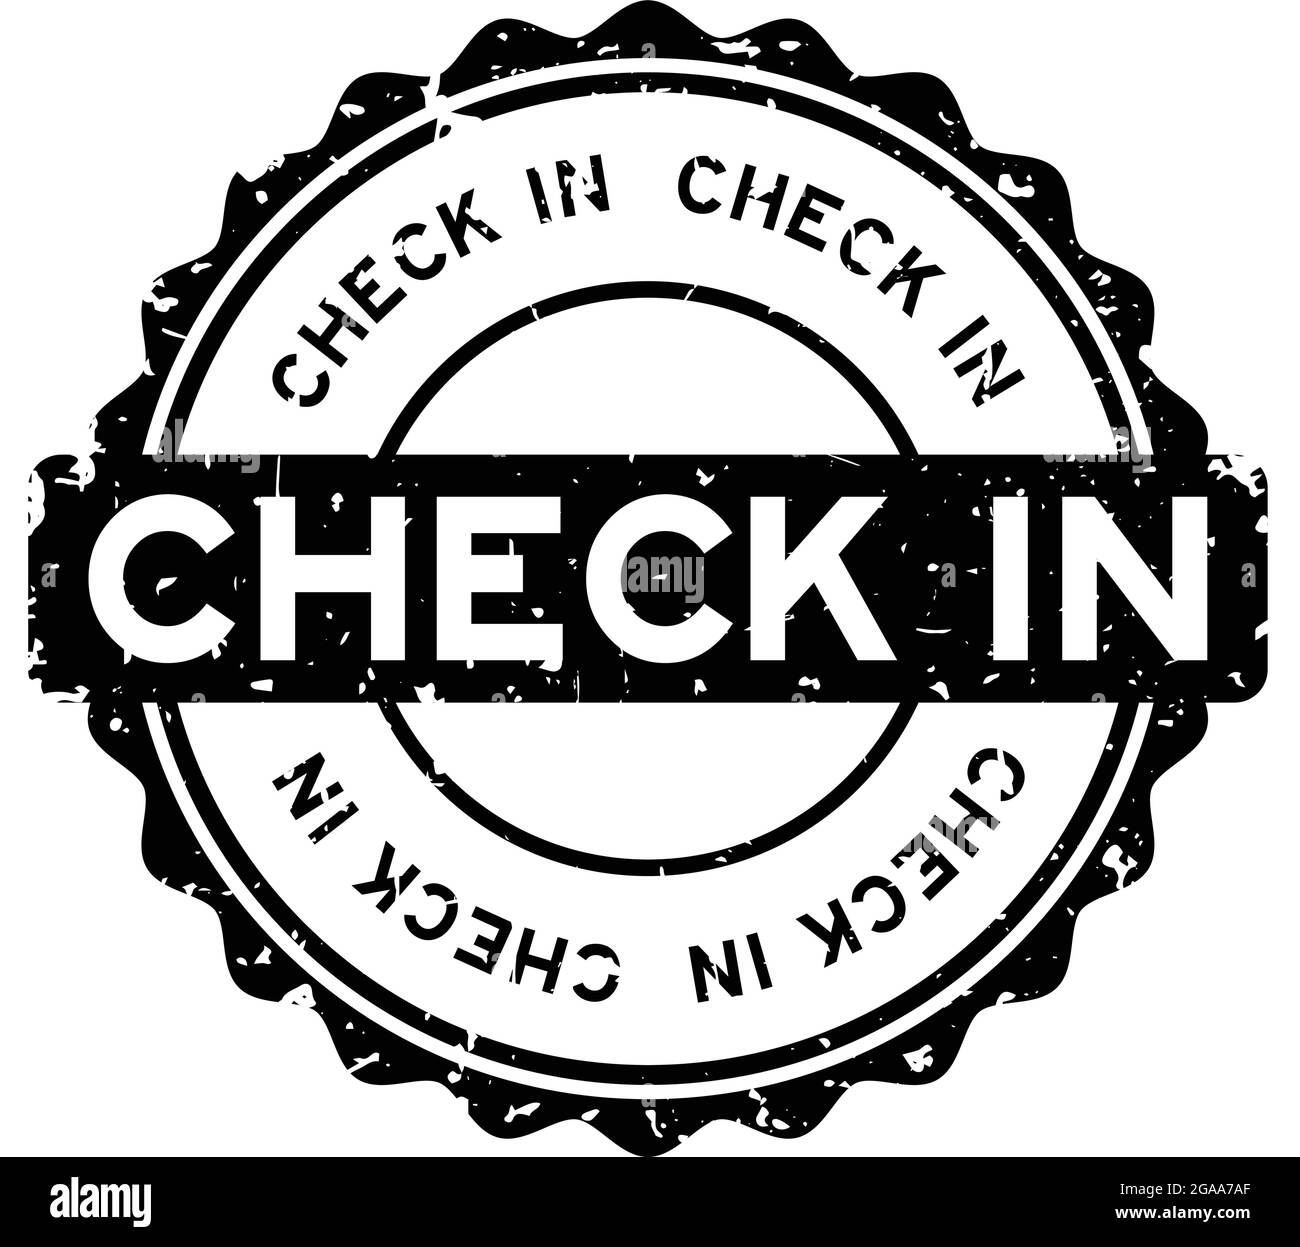 Grunge black check in word round rubber seal stamp on white background Stock Vector